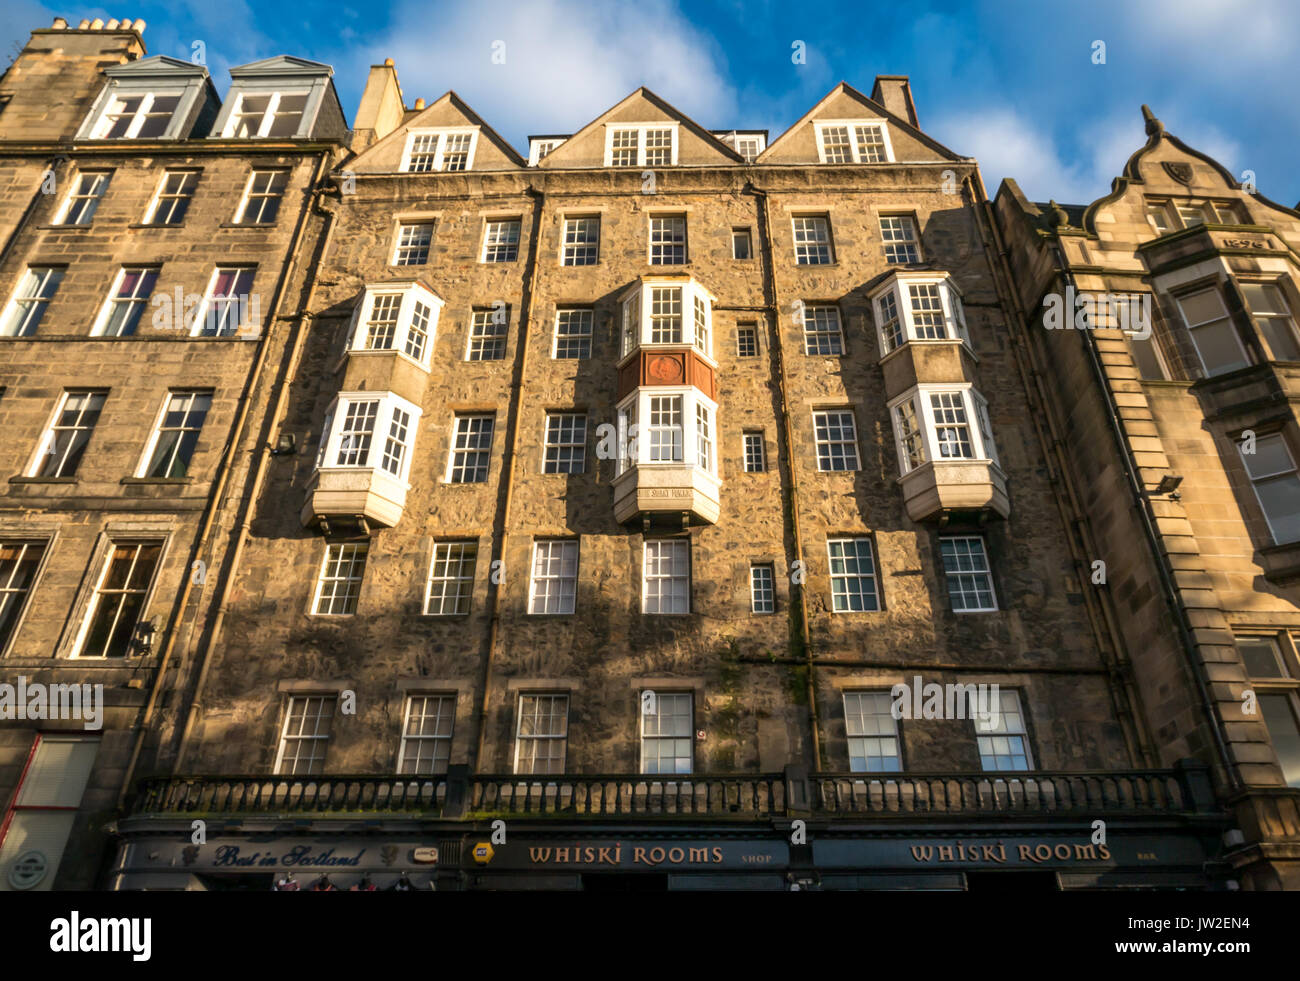 View of high storey tenement building, The Mound, Edinburgh, Scotland, UK, with added balcony windows, and reflected sun light Stock Photo